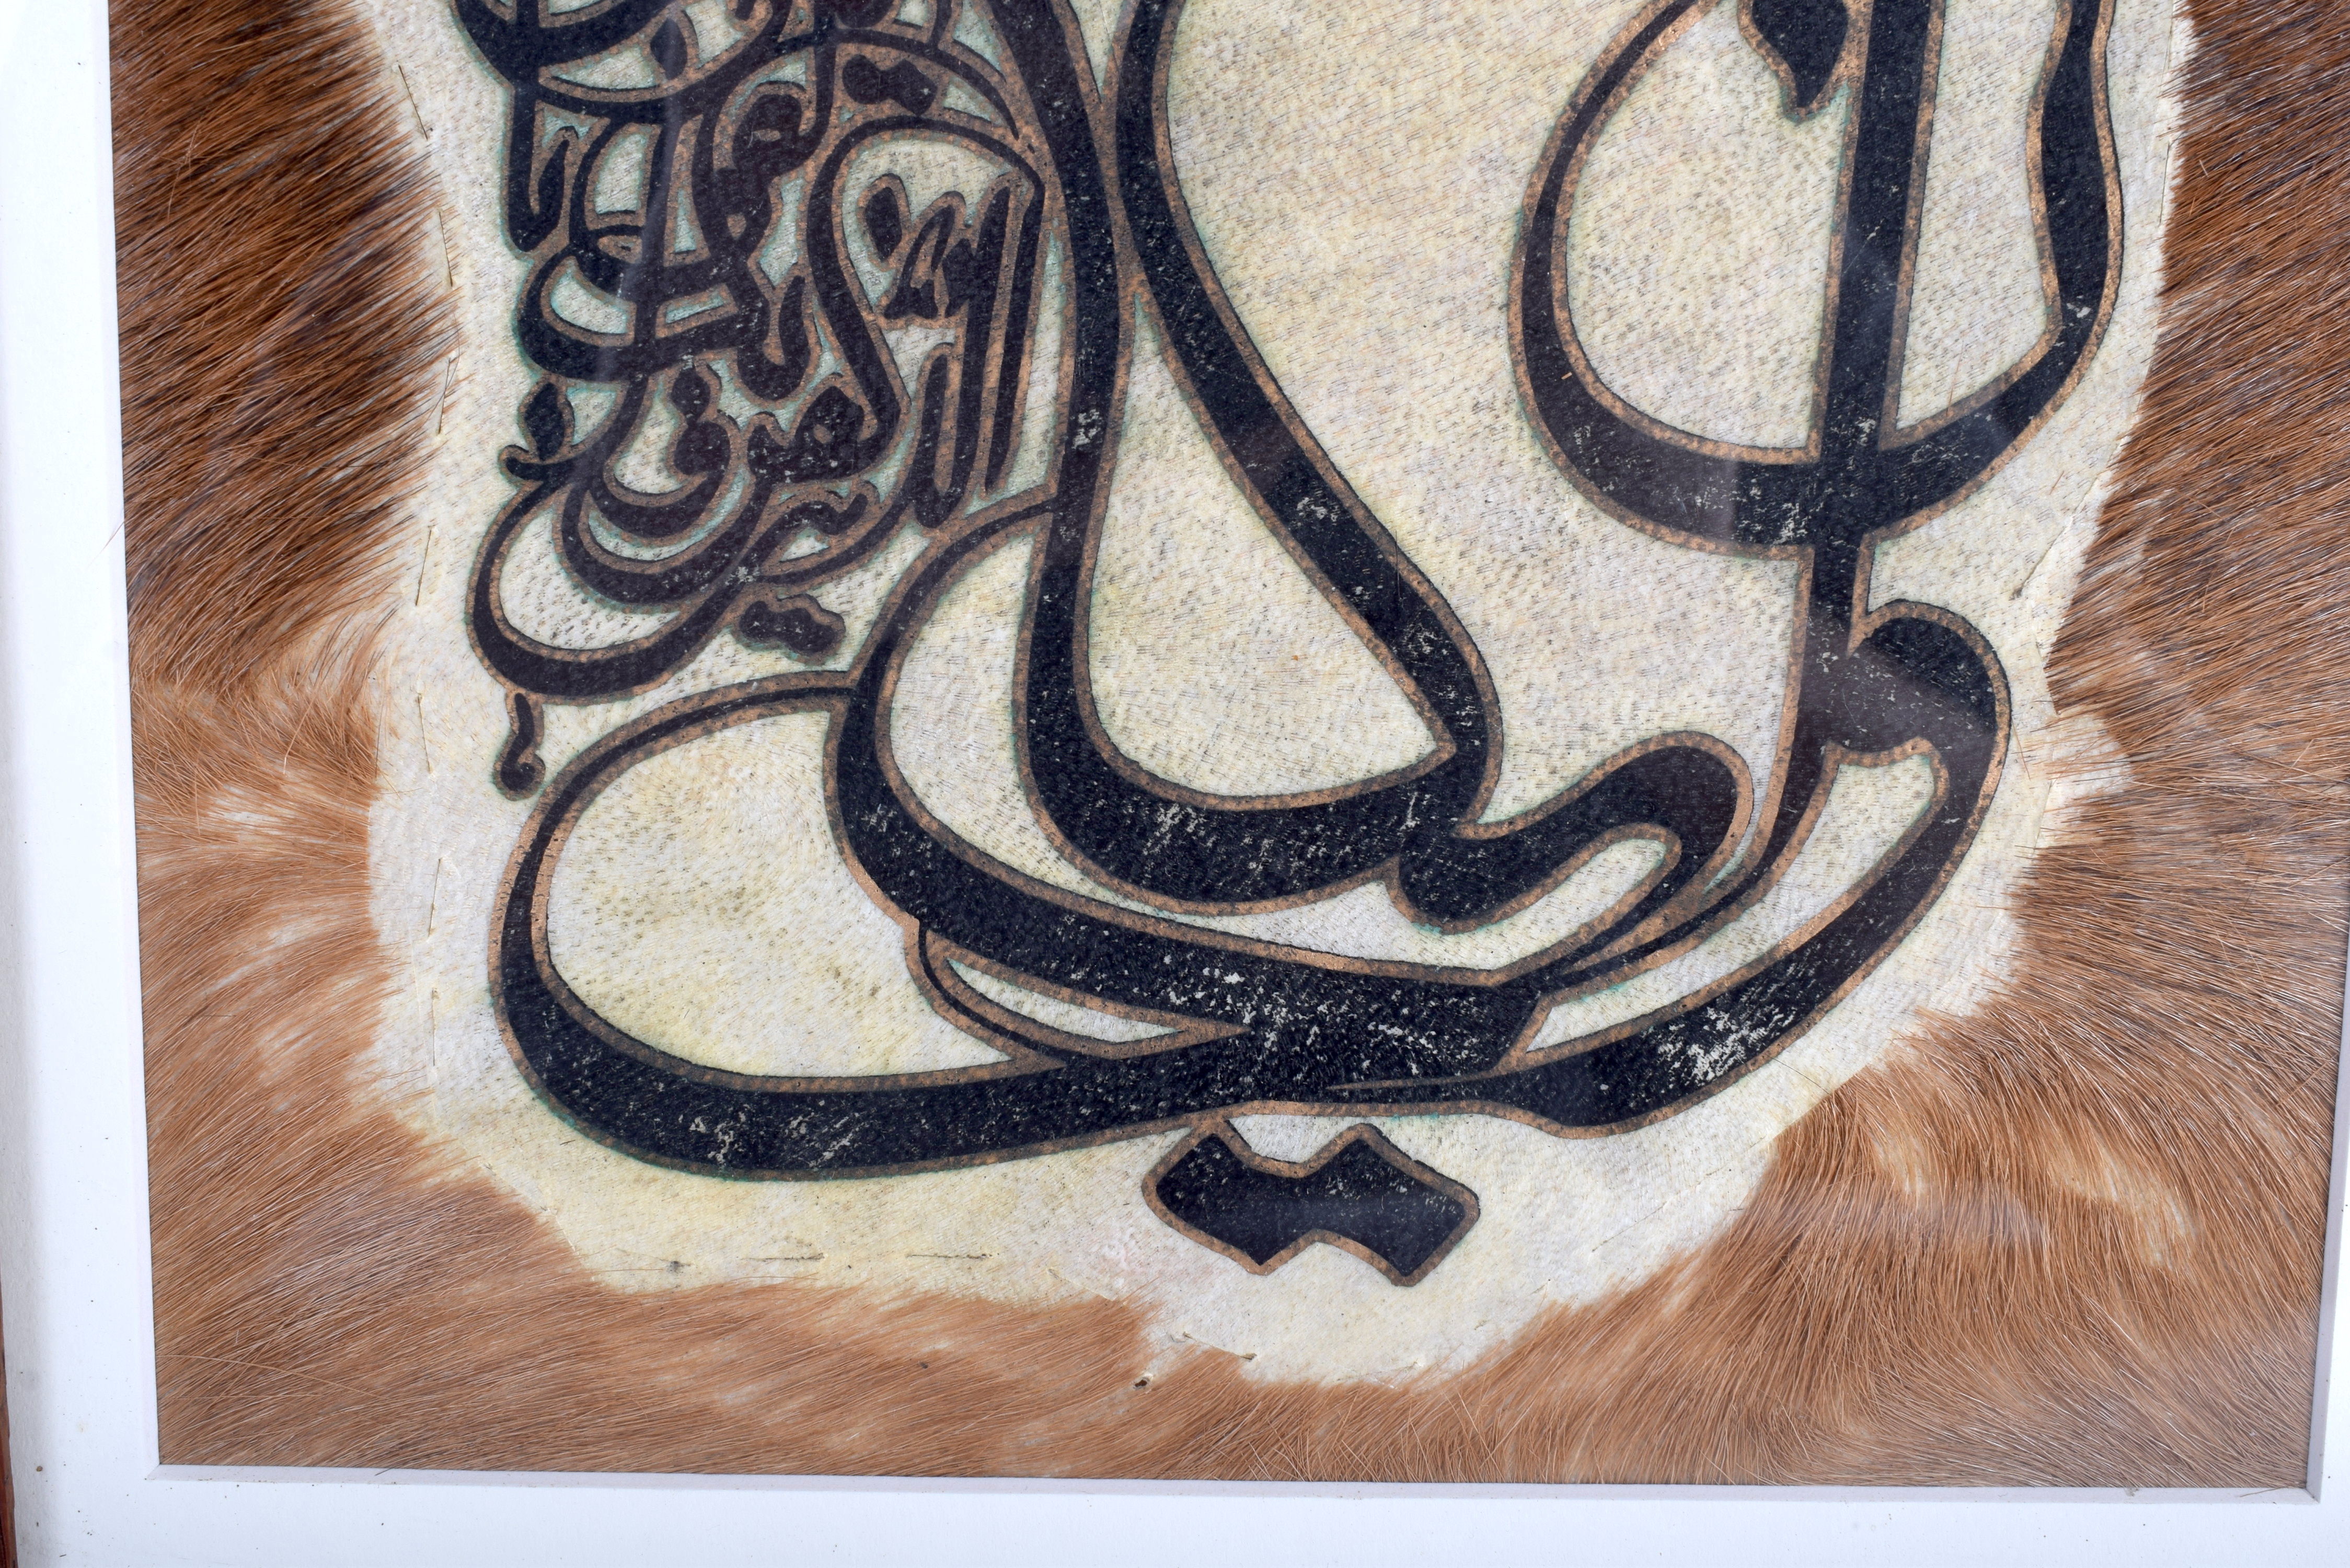 A RARE MIDDLE EASTER ISLAMIC CALLIGRAPHY PANEL painted on skin. Image 23 cm x 34 cm. - Bild 4 aus 4